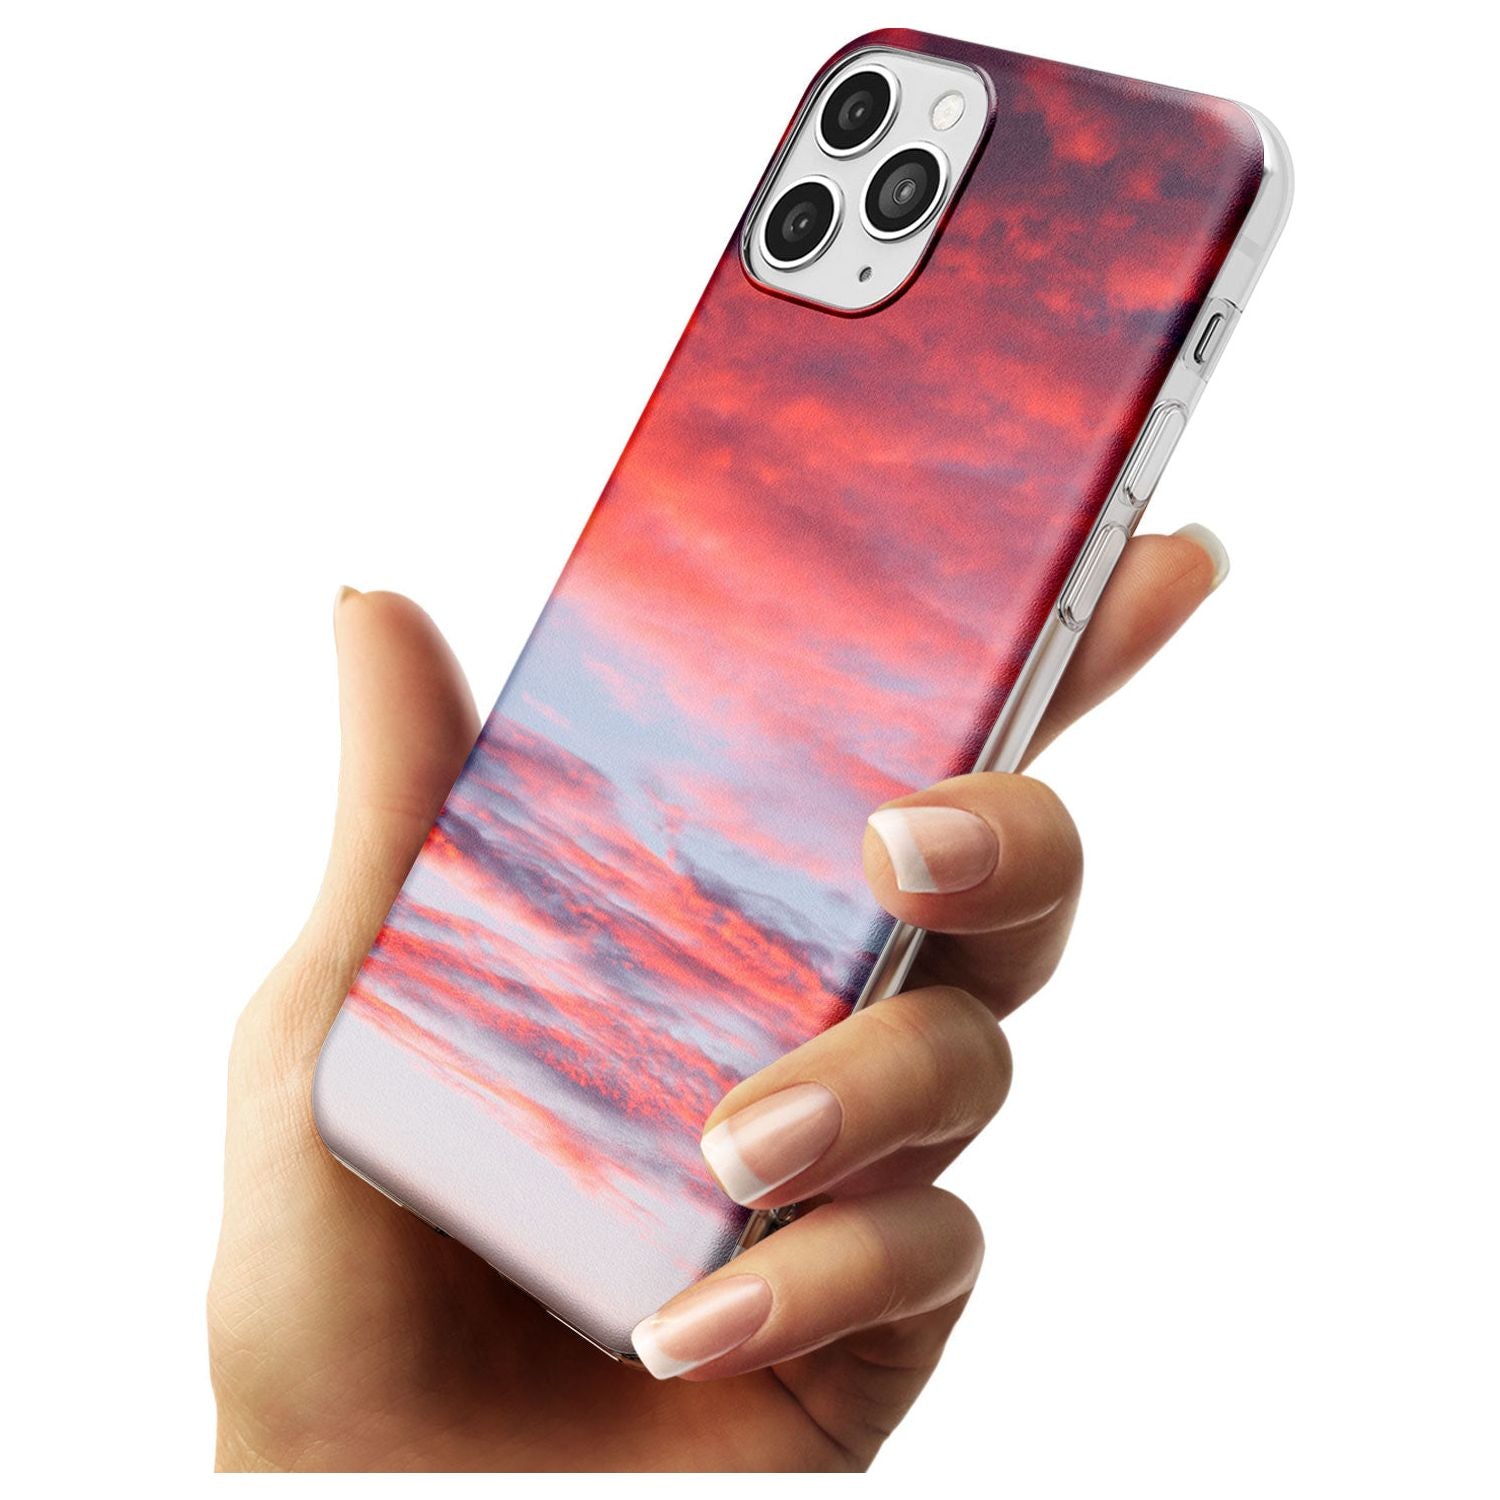 Pink Cloudy Sunset Photograph Slim TPU Phone Case for iPhone 11 Pro Max